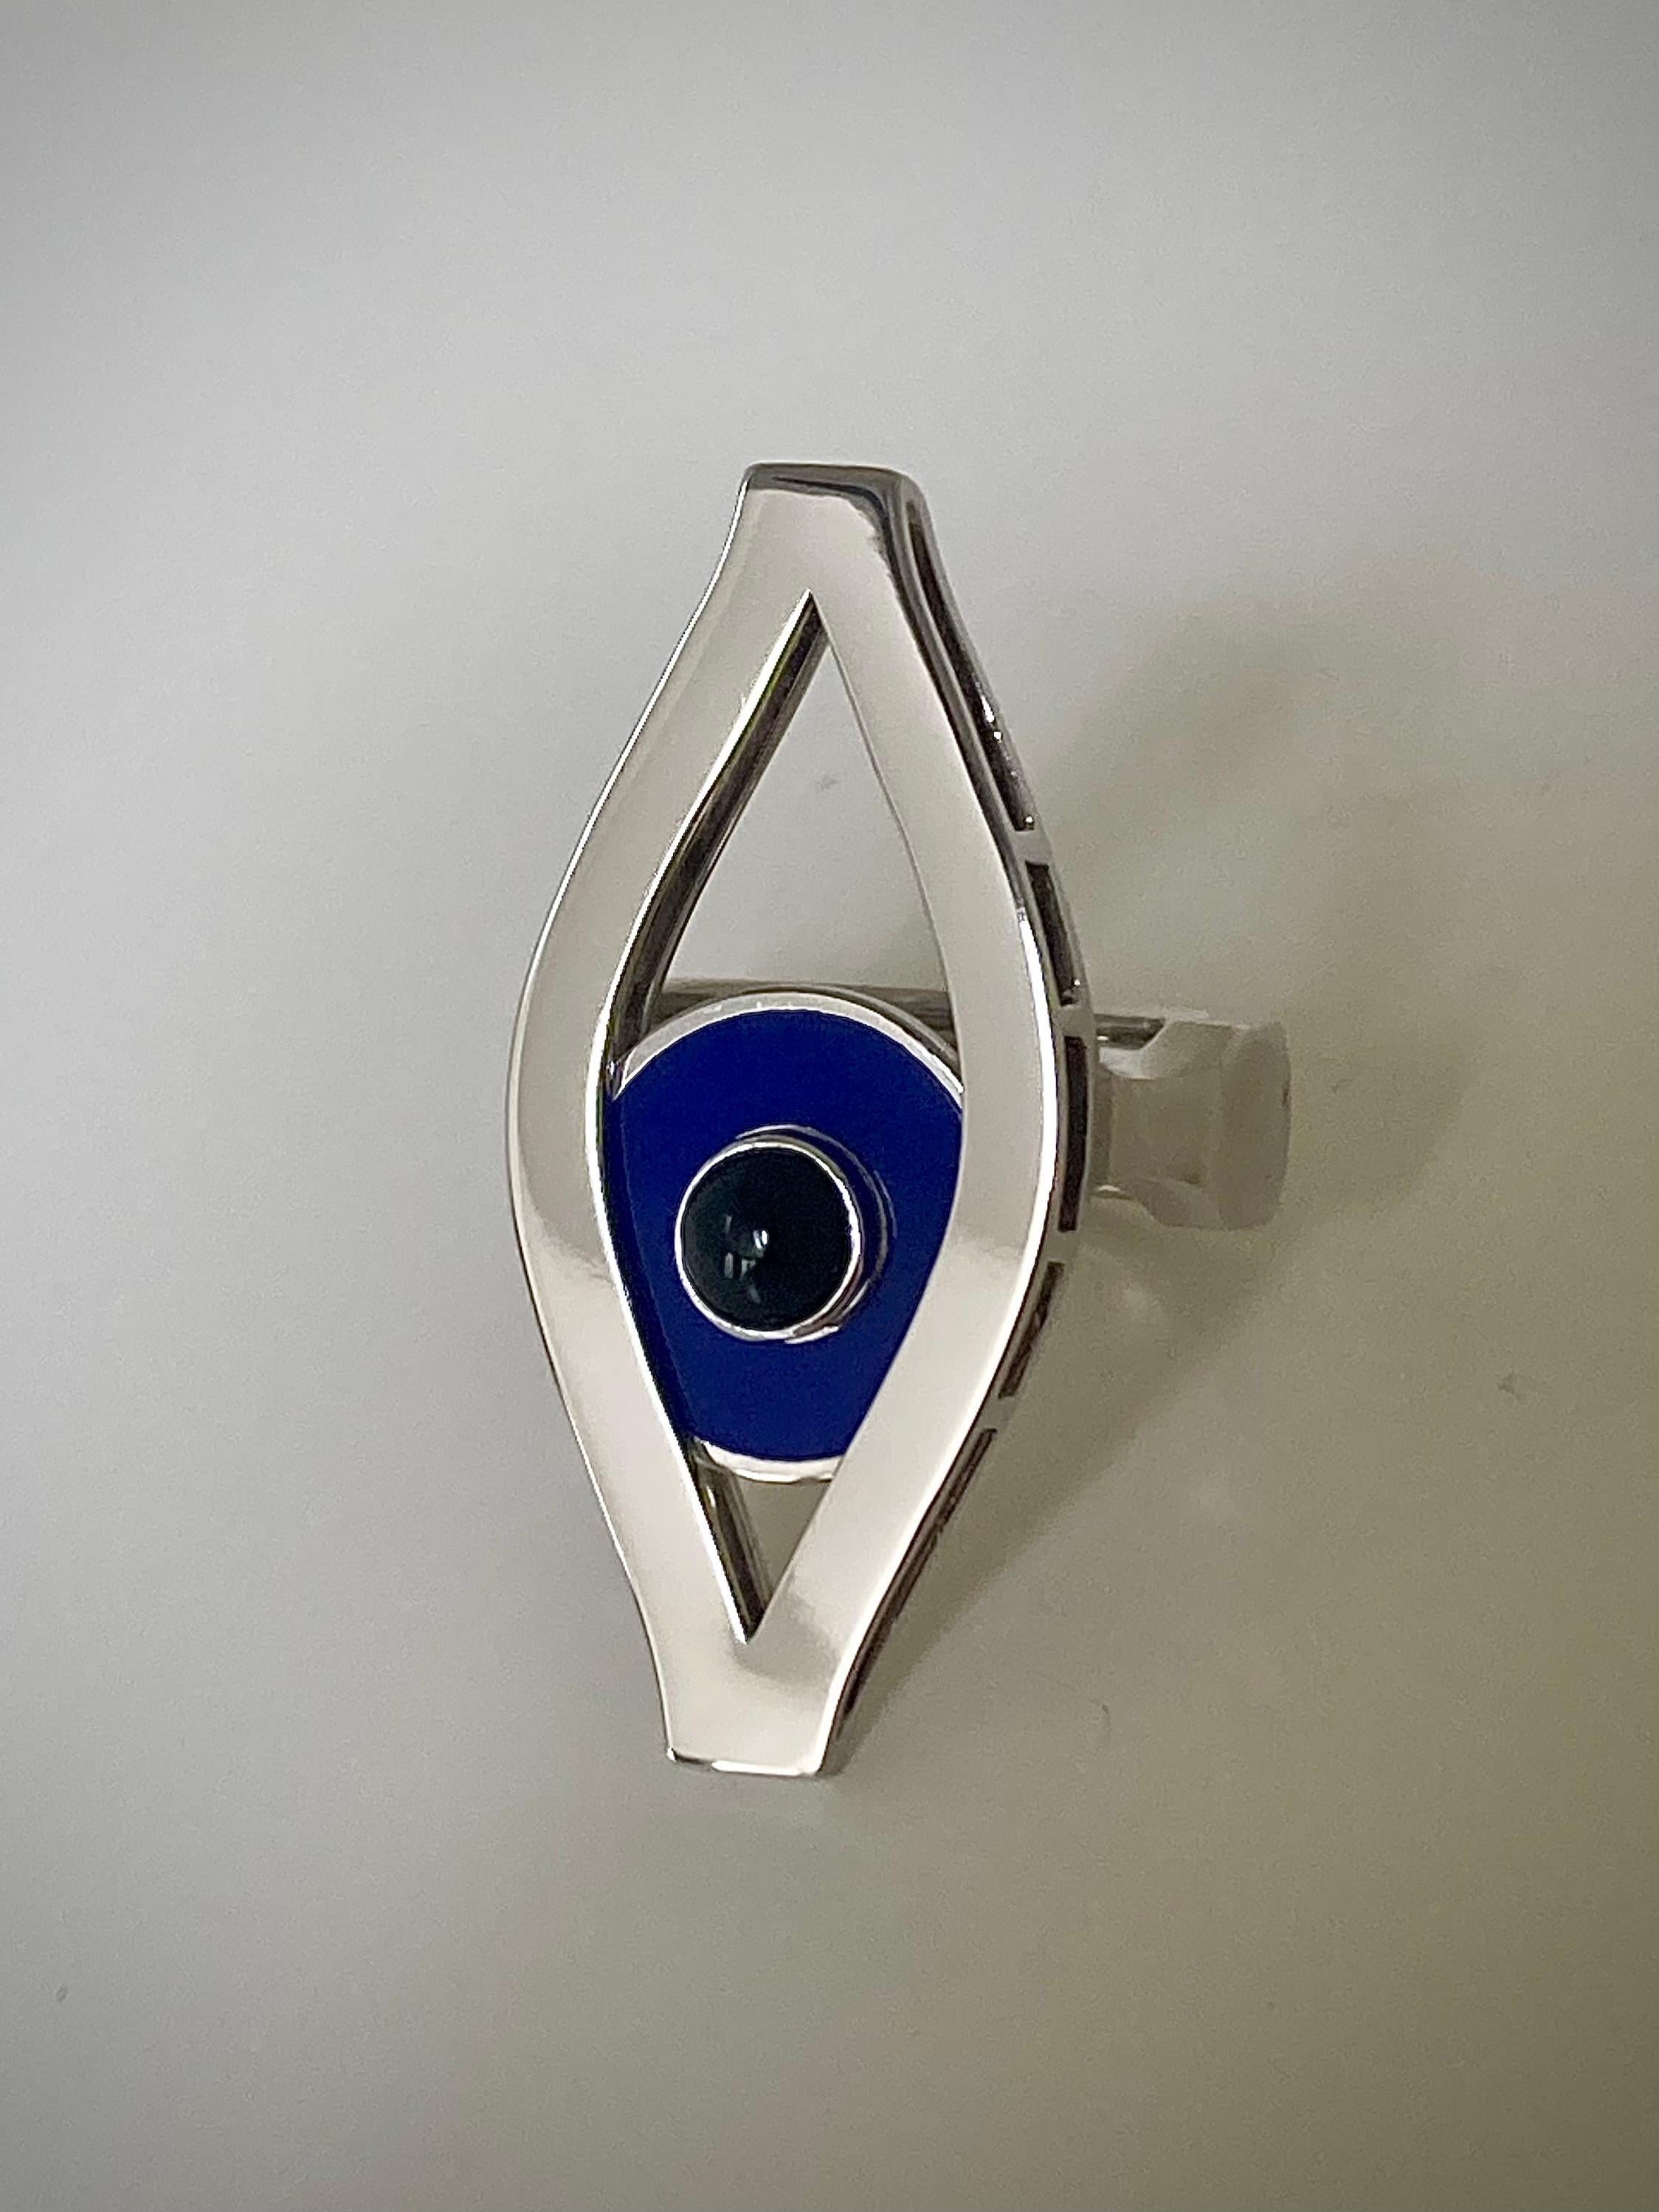 Kinetic ring Third Eye by Ilona Orel in a White Gold 18k with a mobile pupil in a blue lacquer, that slides with the movement of the hand.
 Kinetic jewelry is not just about beauty of motion, it also adds a playful element to traditional